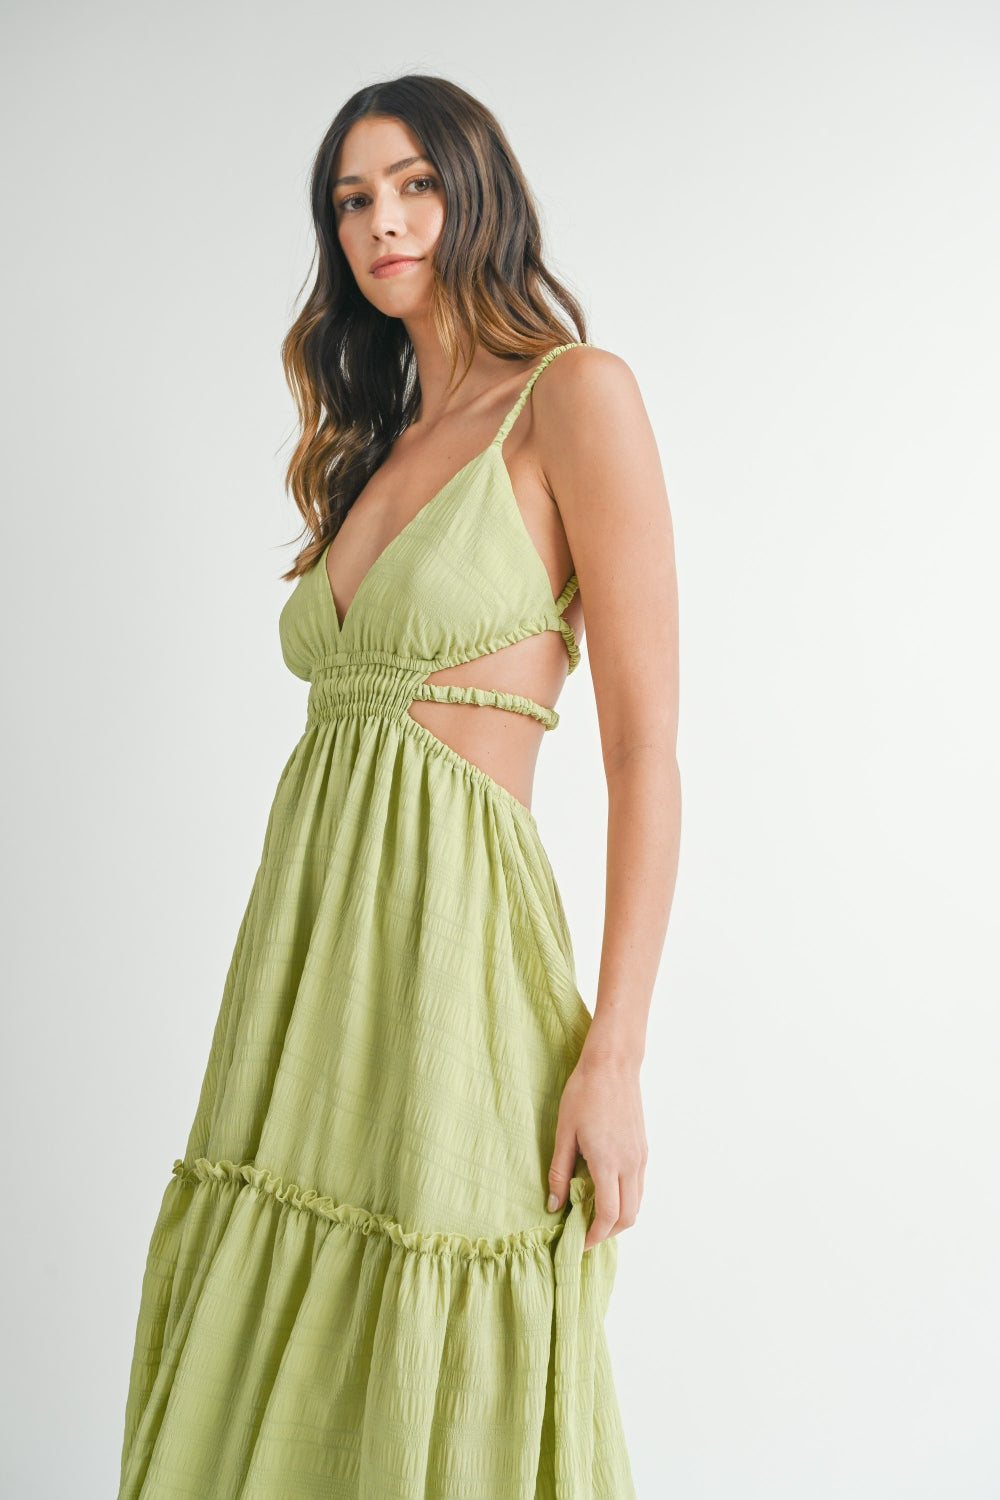 Forces Of Nature Backless Maxi Dress (S-L)